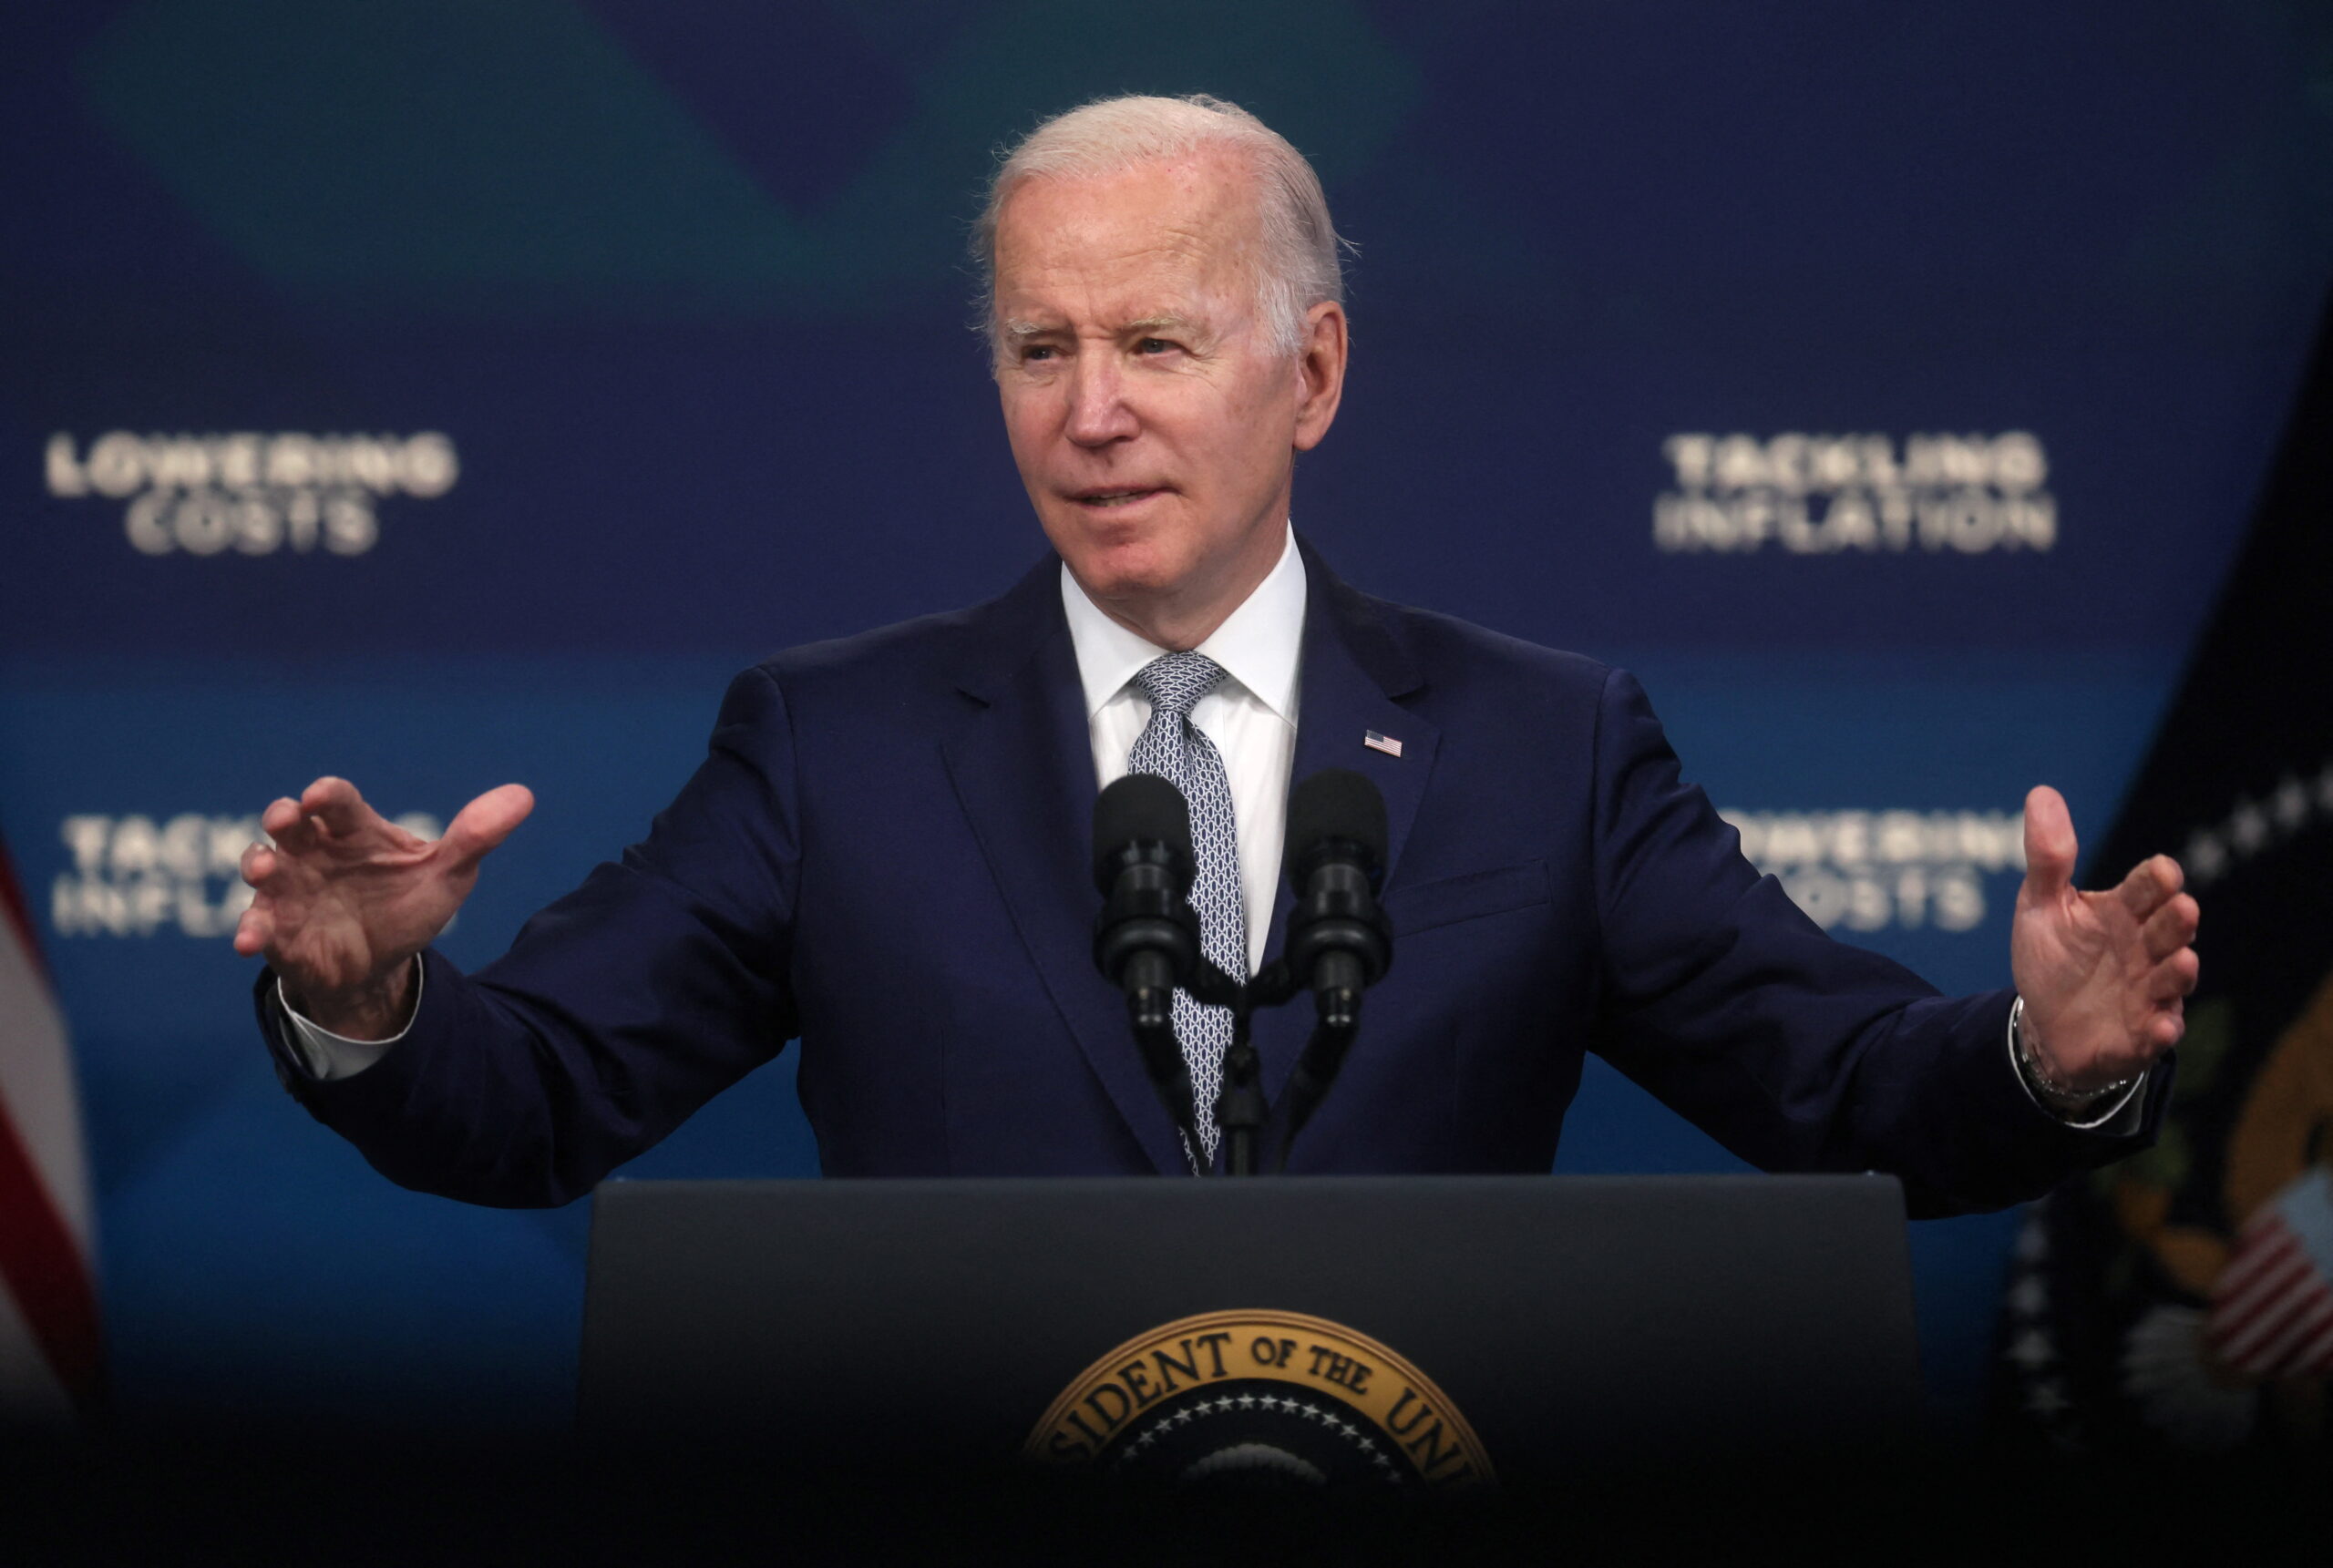 republicans-should-help-biden-fight-inflation-instead-of-campaign-on-it